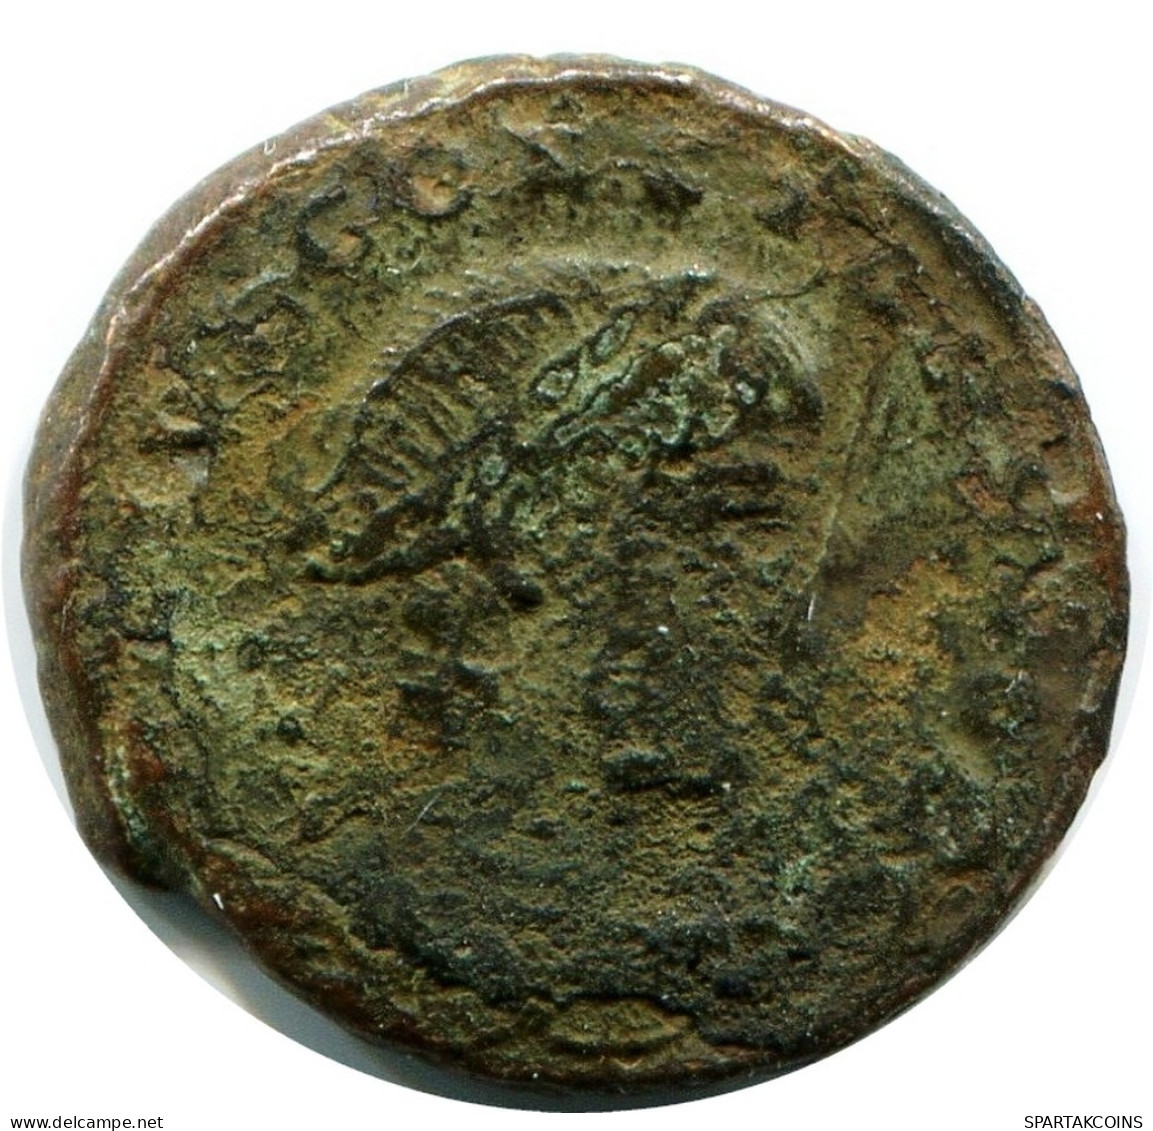 CONSTANS MINTED IN ANTIOCH FOUND IN IHNASYAH HOARD EGYPT #ANC11833.14.U.A - El Impero Christiano (307 / 363)